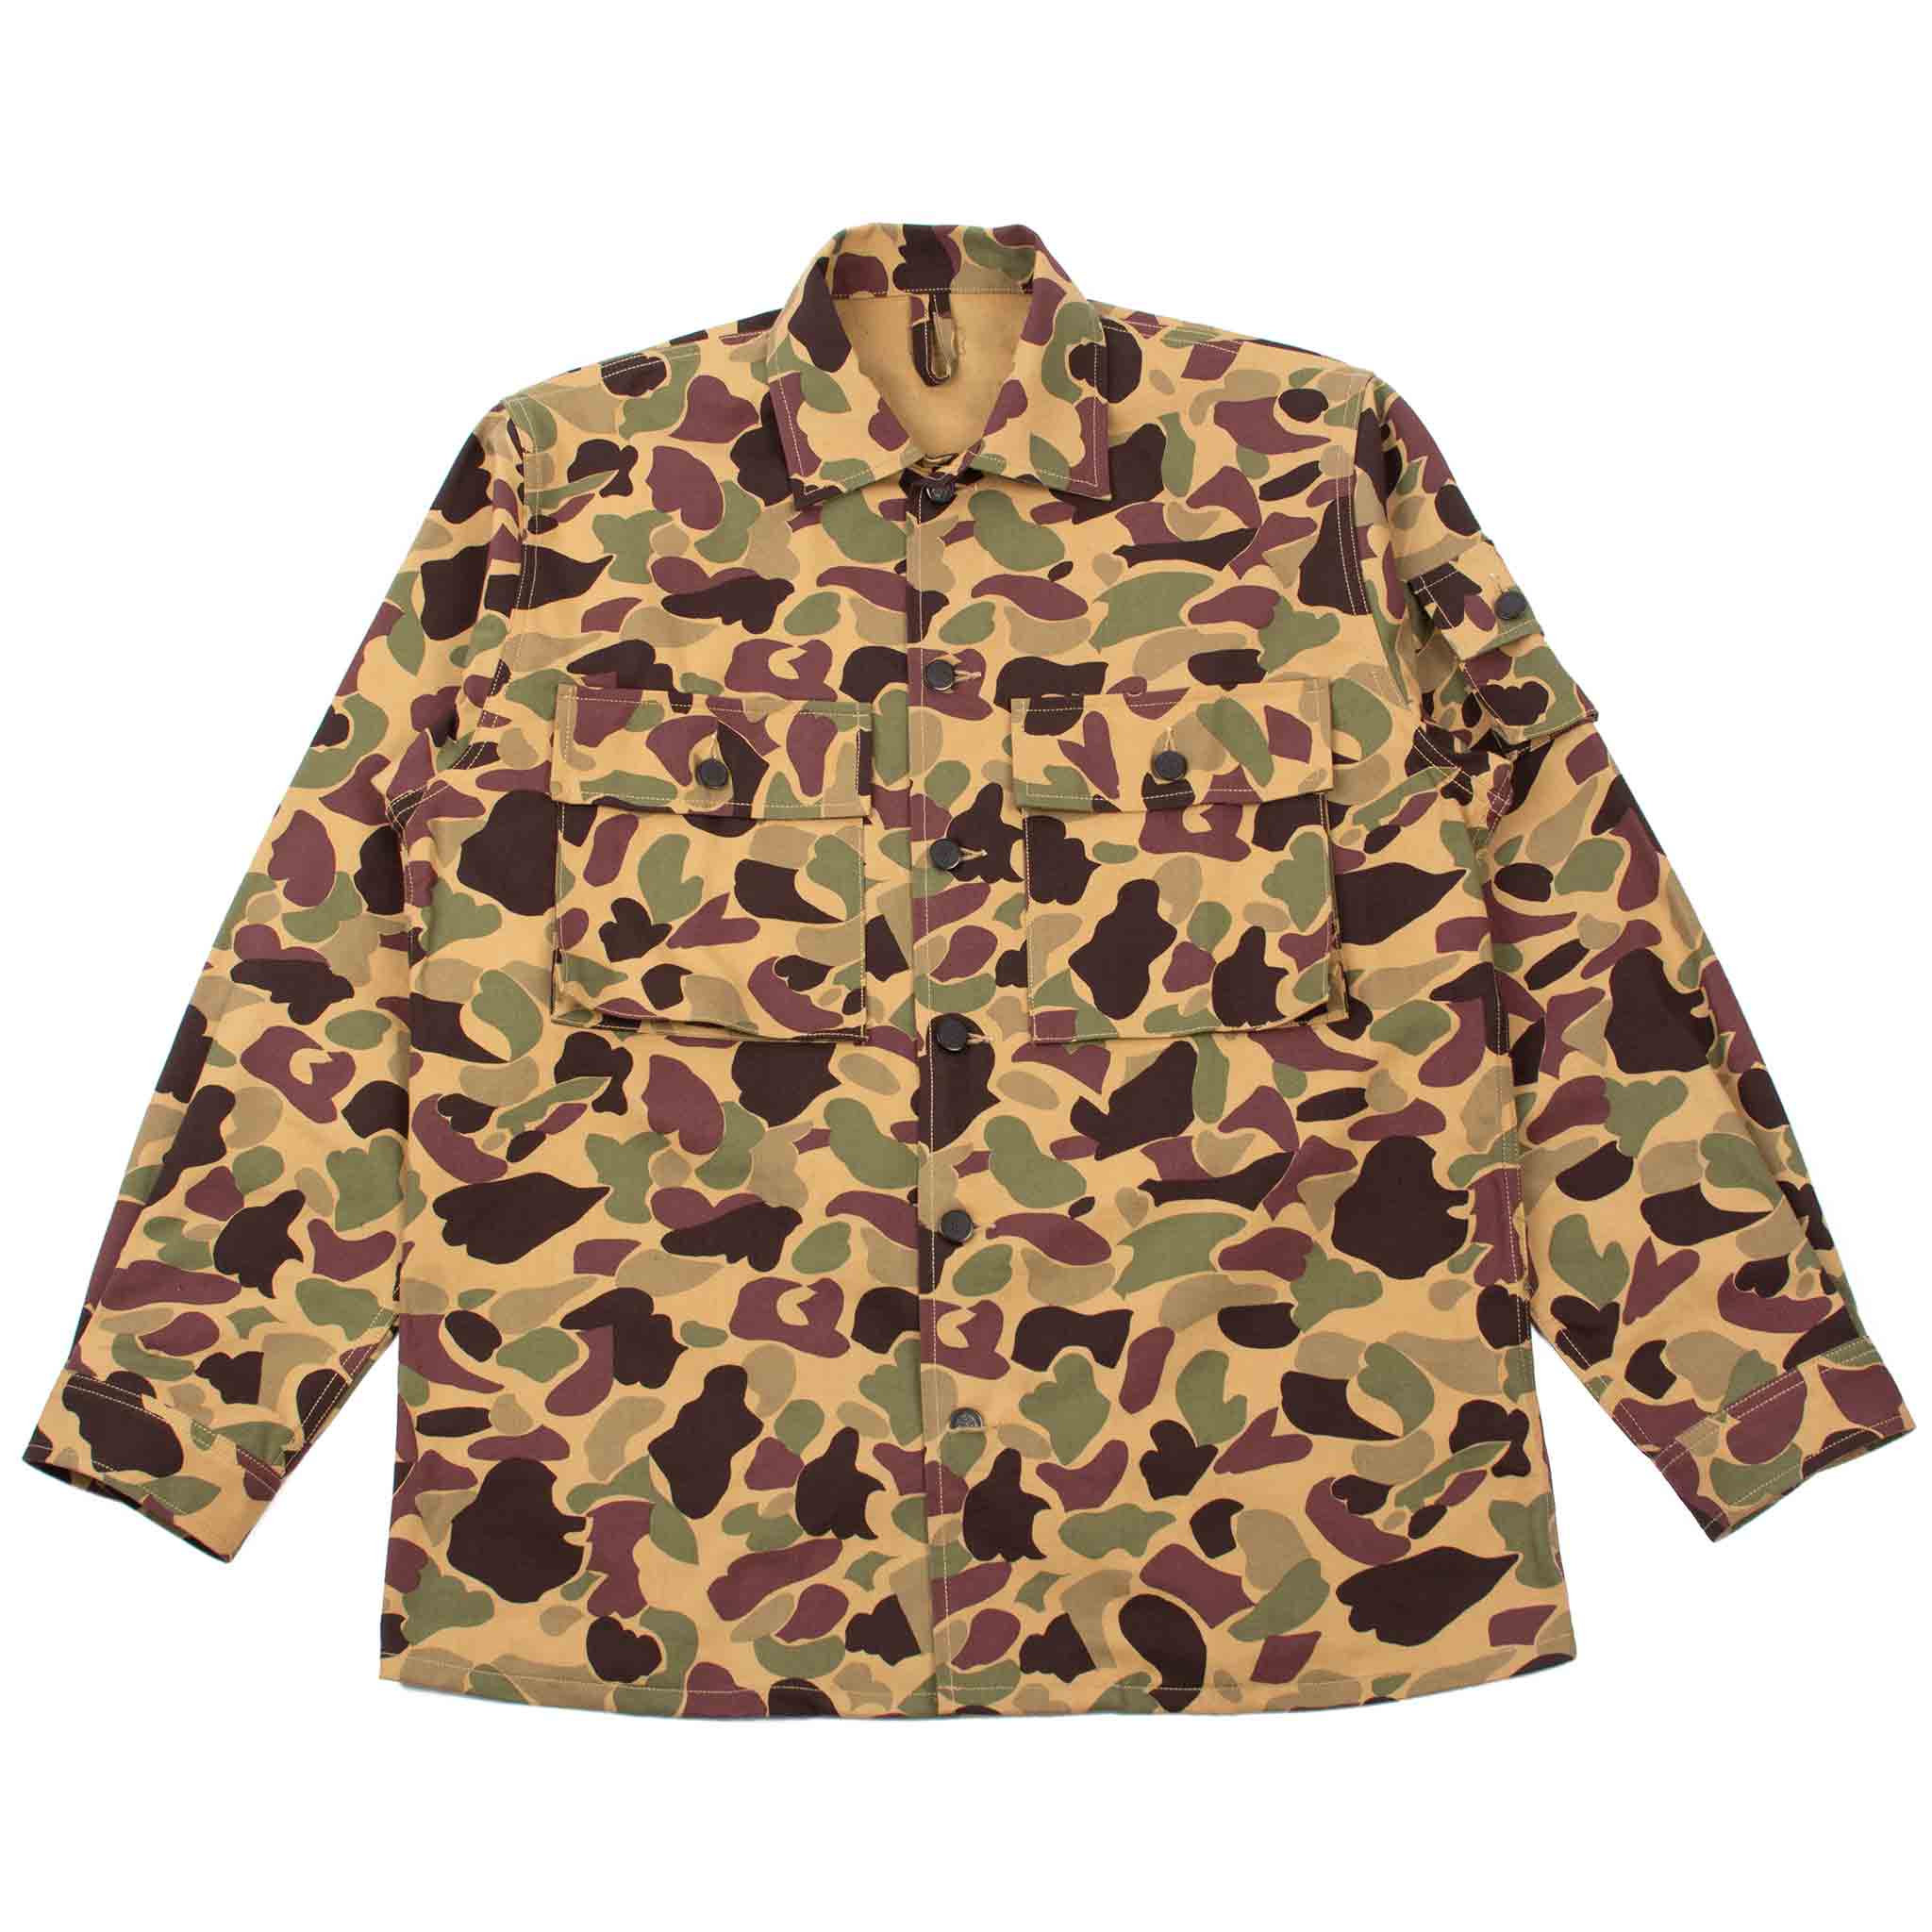 The Real McCoy's MJ21013 Beo Gam Camouflage Shirt Beige